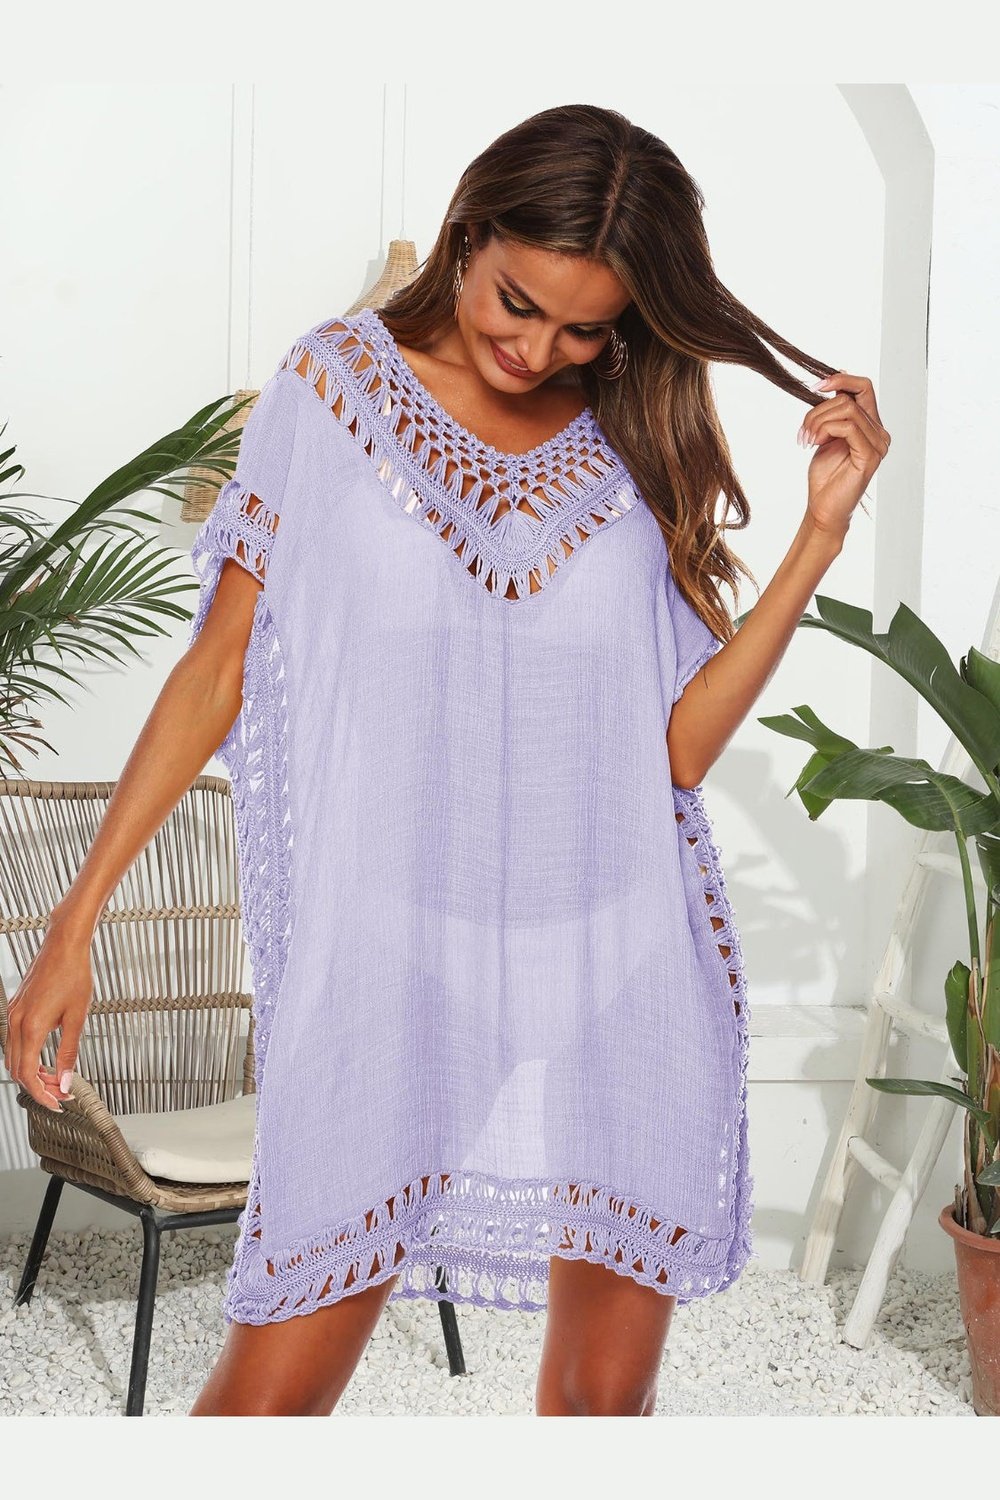 Cutout V-Neck Short Sleeve Cover-Up - Cover-Ups - FITGGINS